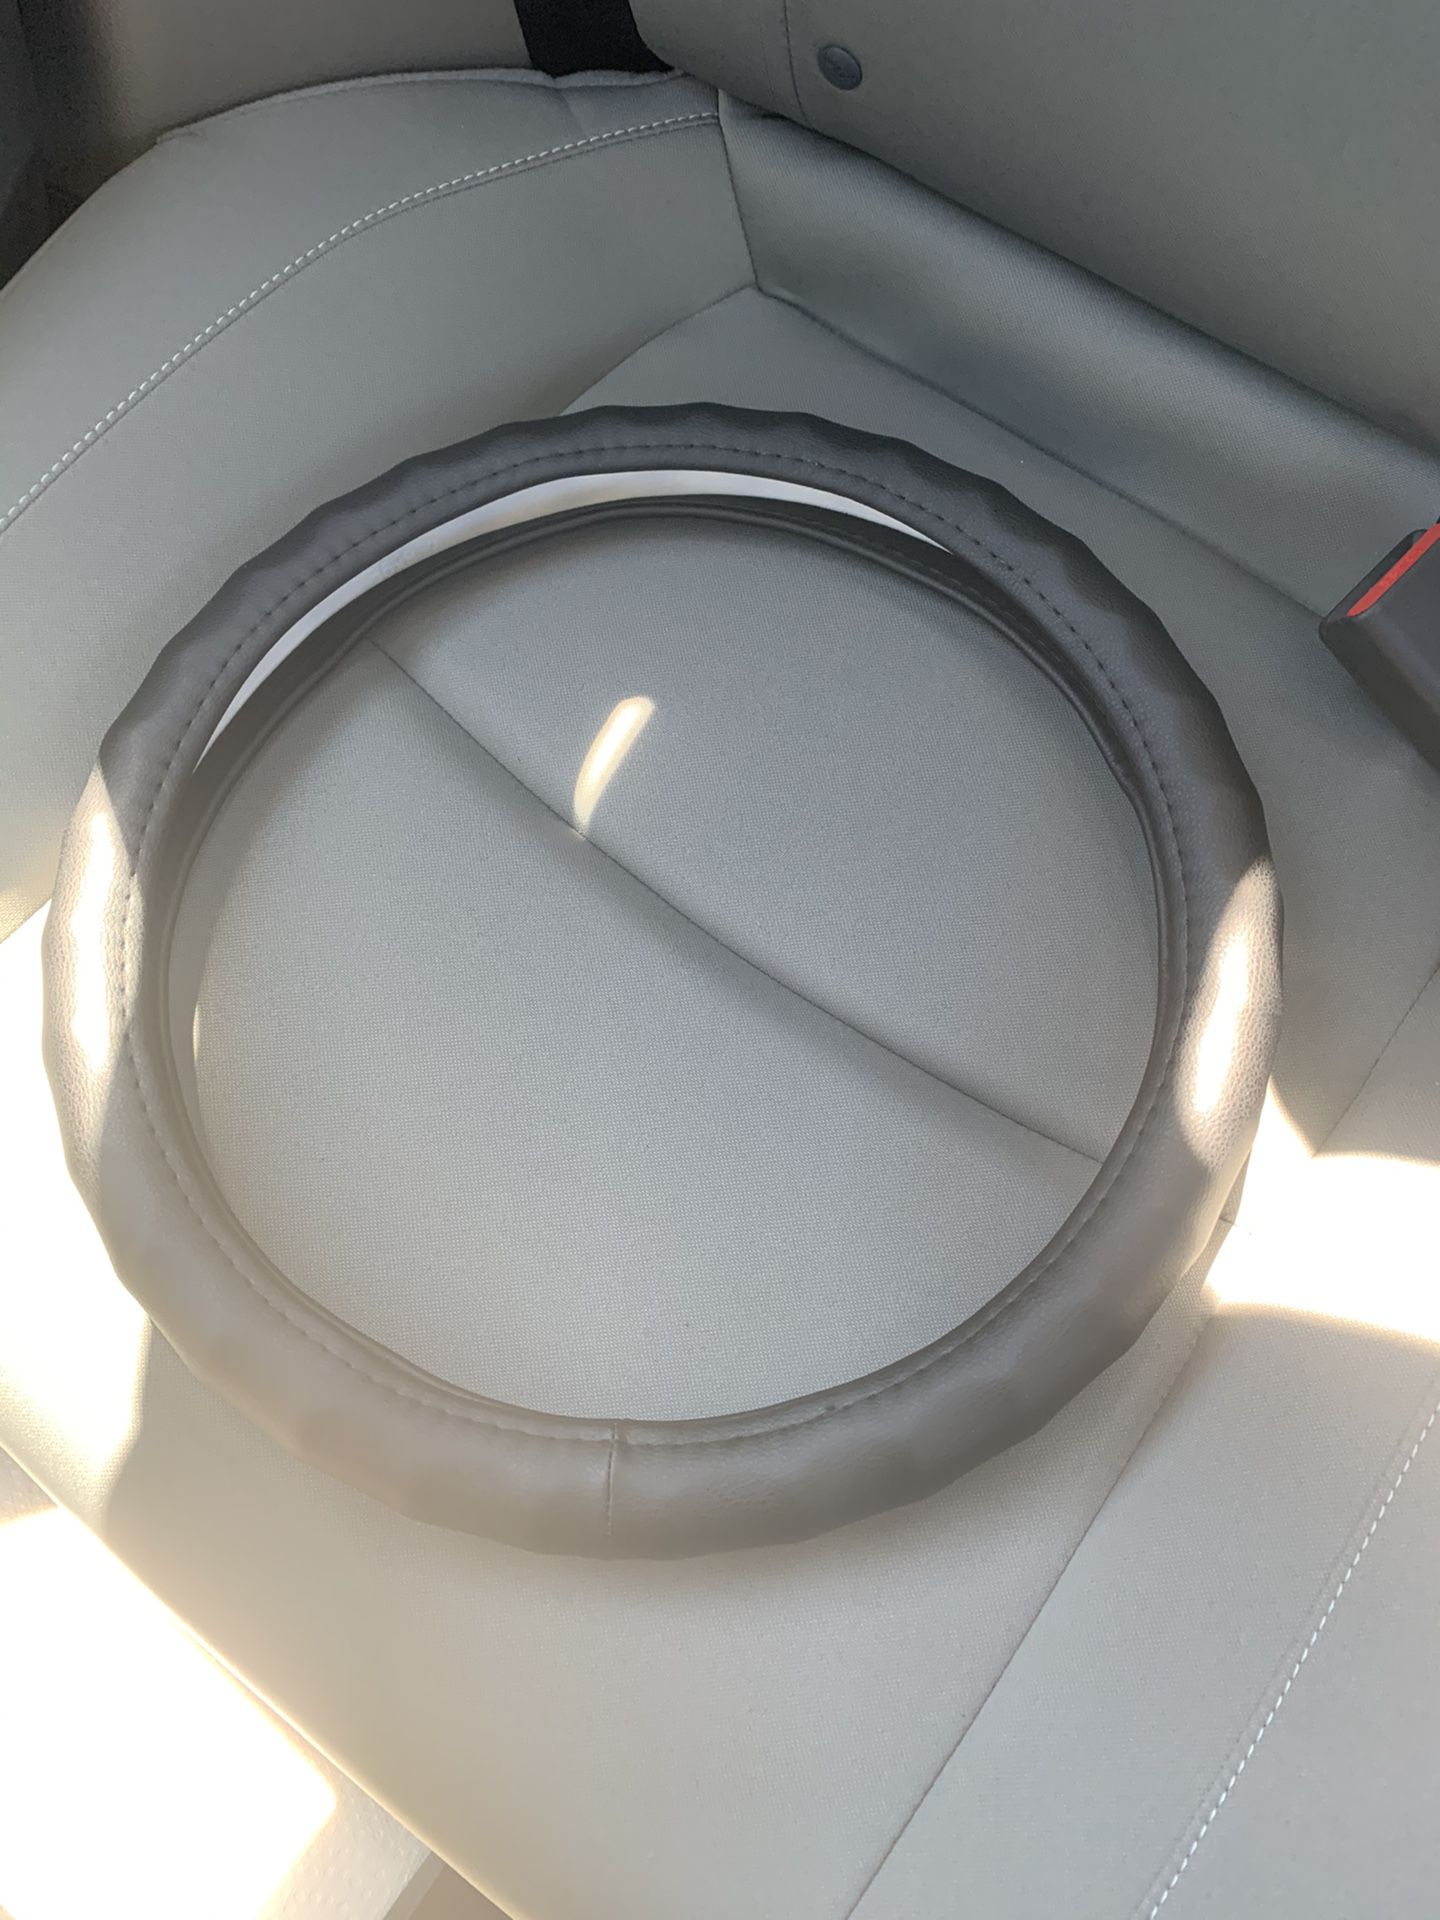 Steering Wheel Cover - Genuine Leather (taken out of box)